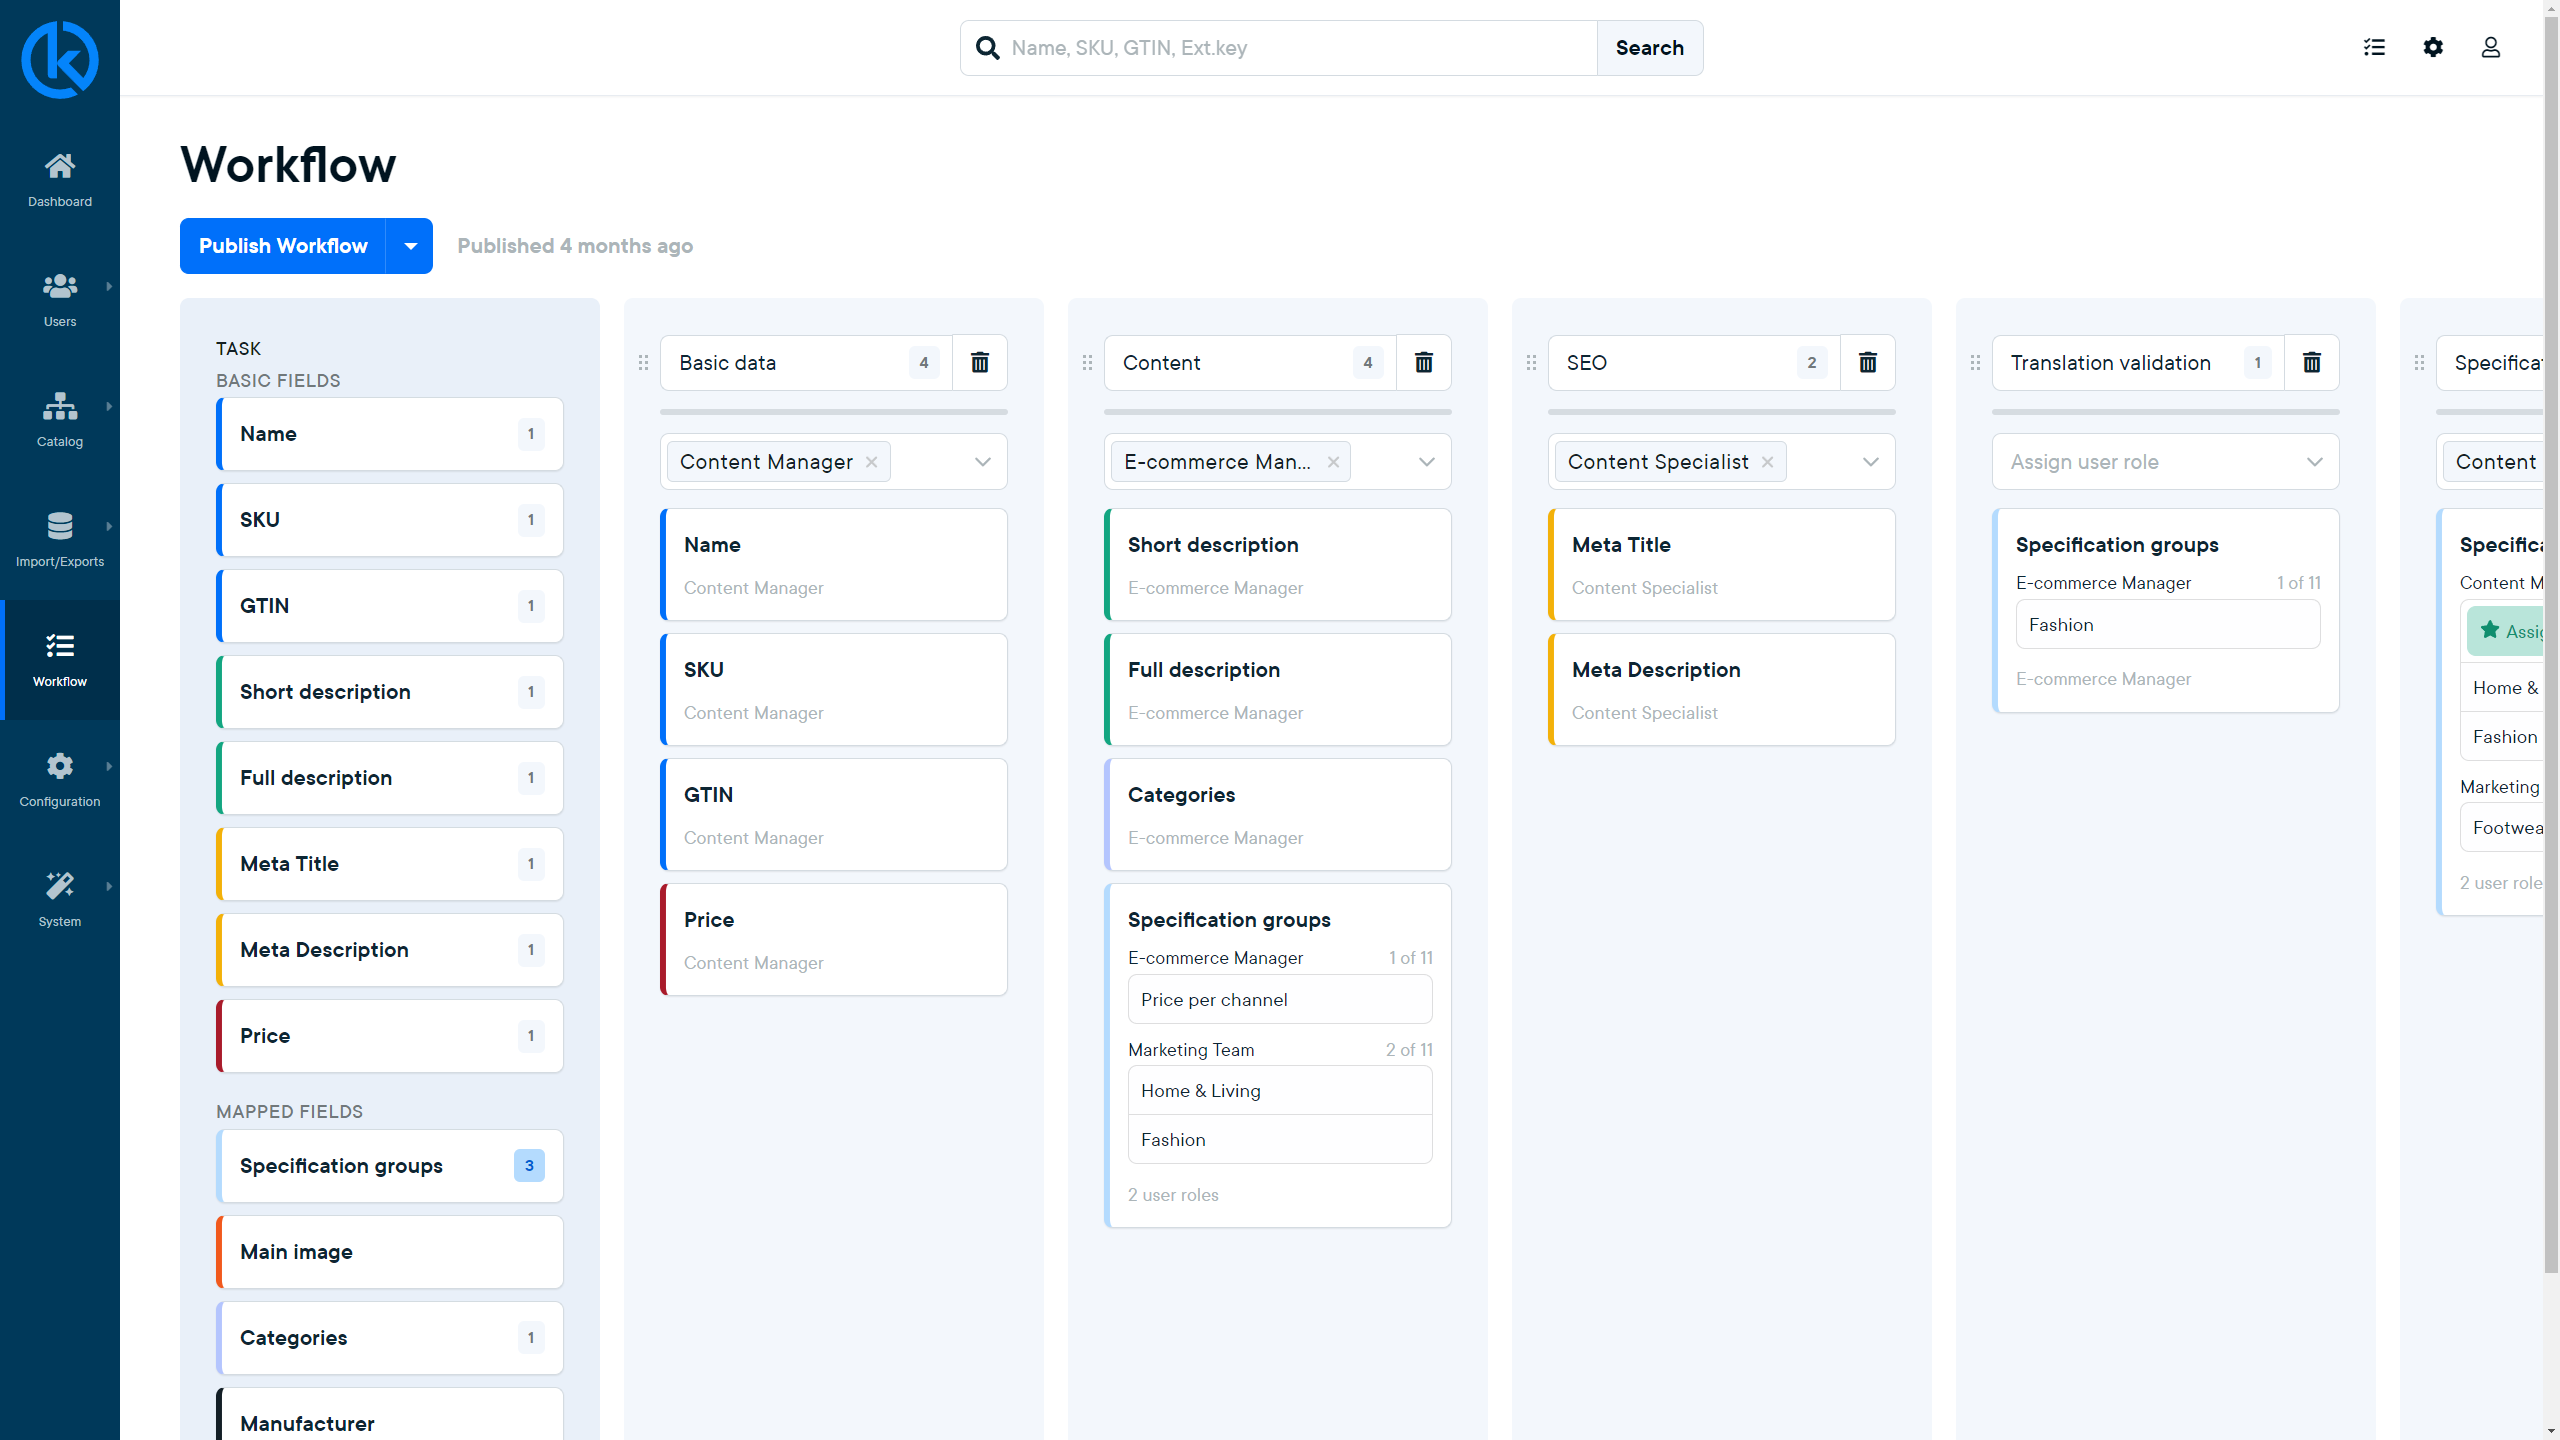 The Workflow feature optimizes team collaboration by assigning tasks and roles, swiftly identifying data gaps, and ensuring accurate, efficient product launches.